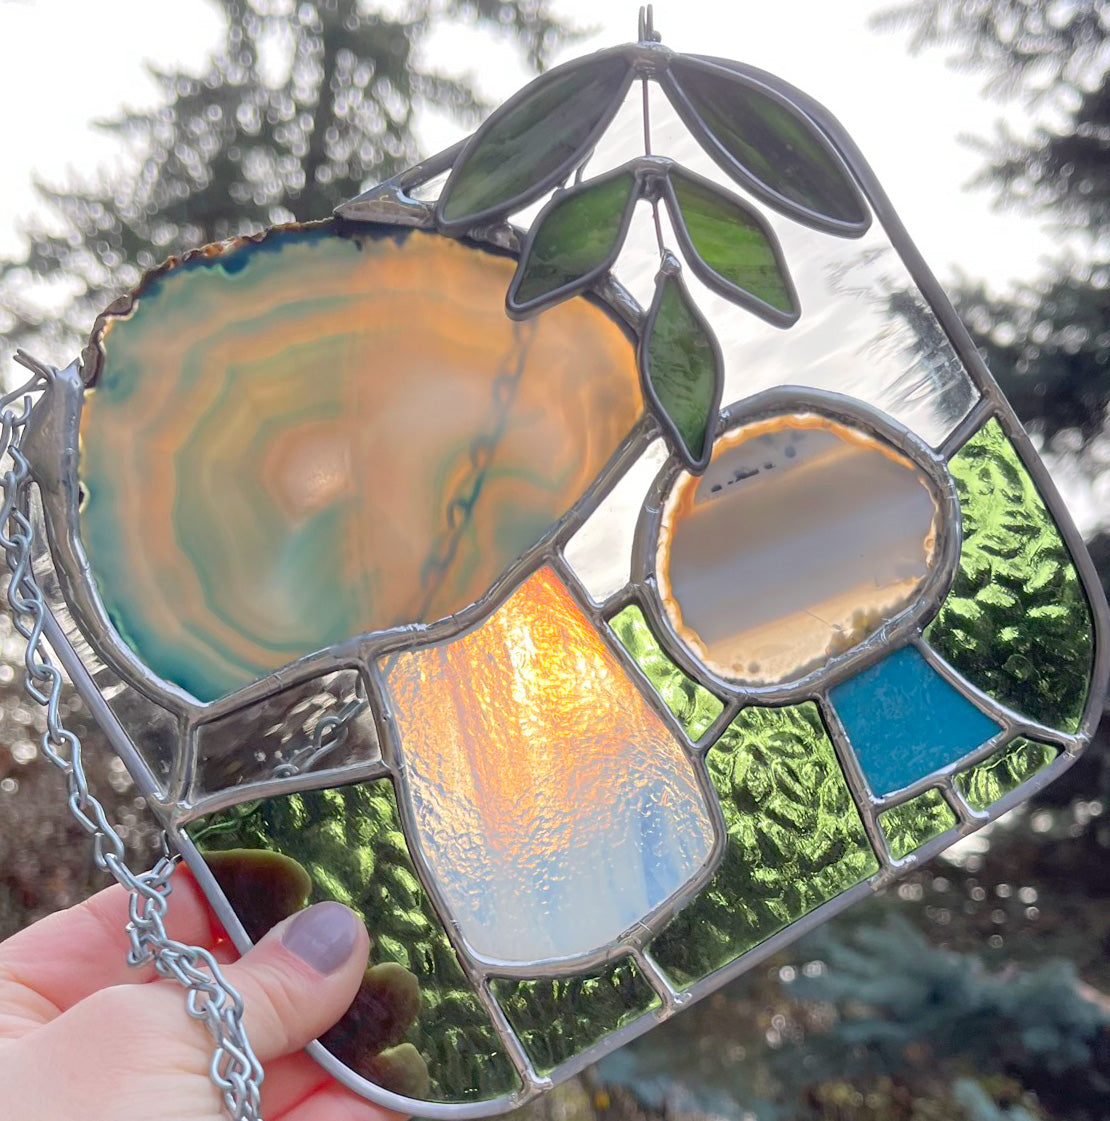 Handmade Stained Glass Mushrooms - Agate Slices and Layered Stained Glass Suncatcher